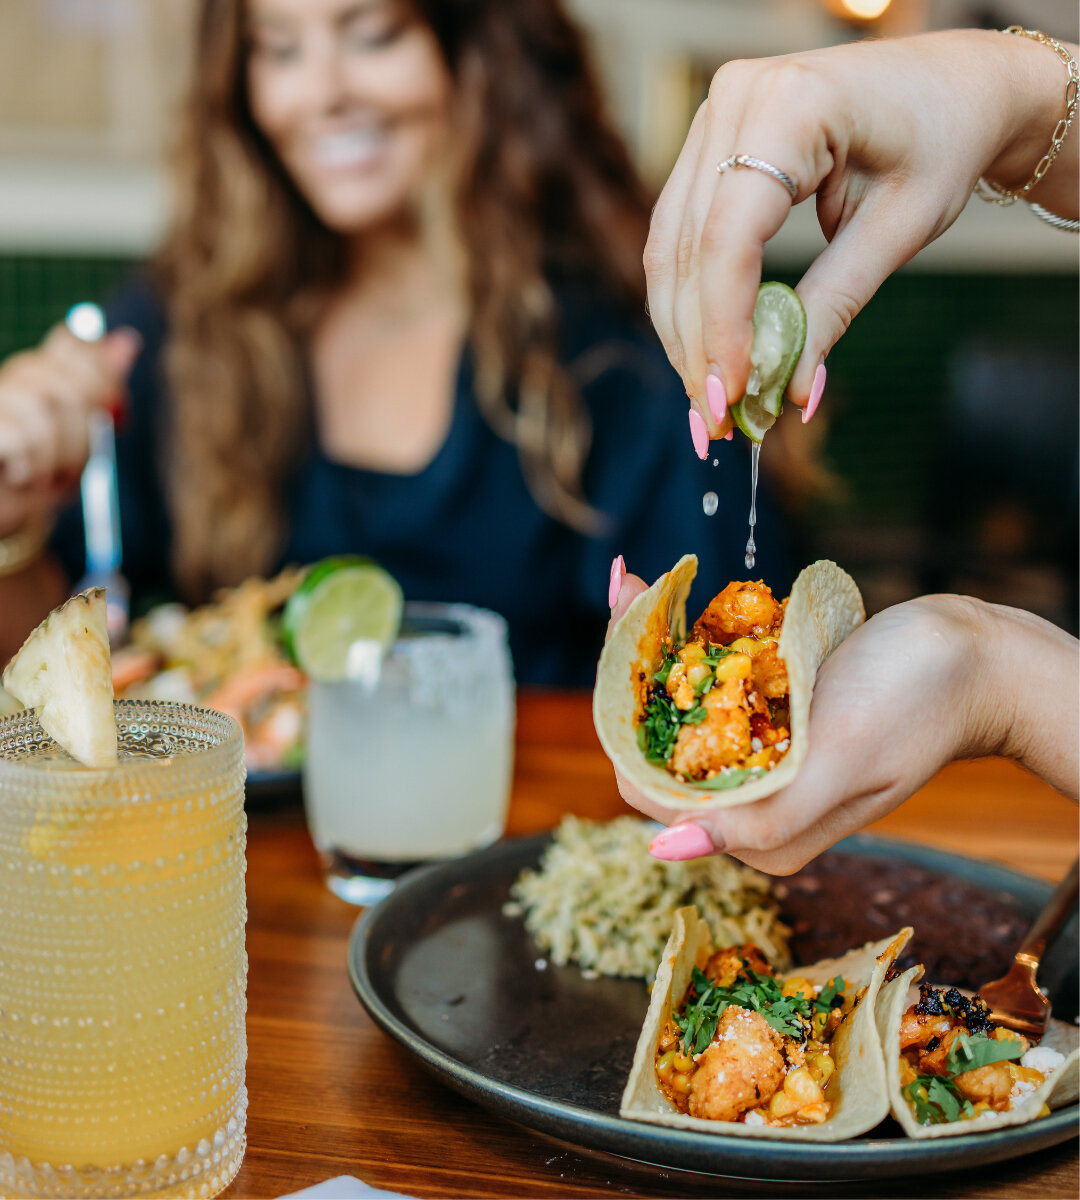 Perfection until the last drop!⁣ Celebrate #TacoTuesday with the Fried Shrimp and Elote tacos from Mexican Sugar! 🌮

&bull;
&bull;
&bull;
&bull;
&bull;
#legacynorth #shopsatlegacynorth #shopsatlegacy #plano #planolife #planomoms #planofoodies #dalla